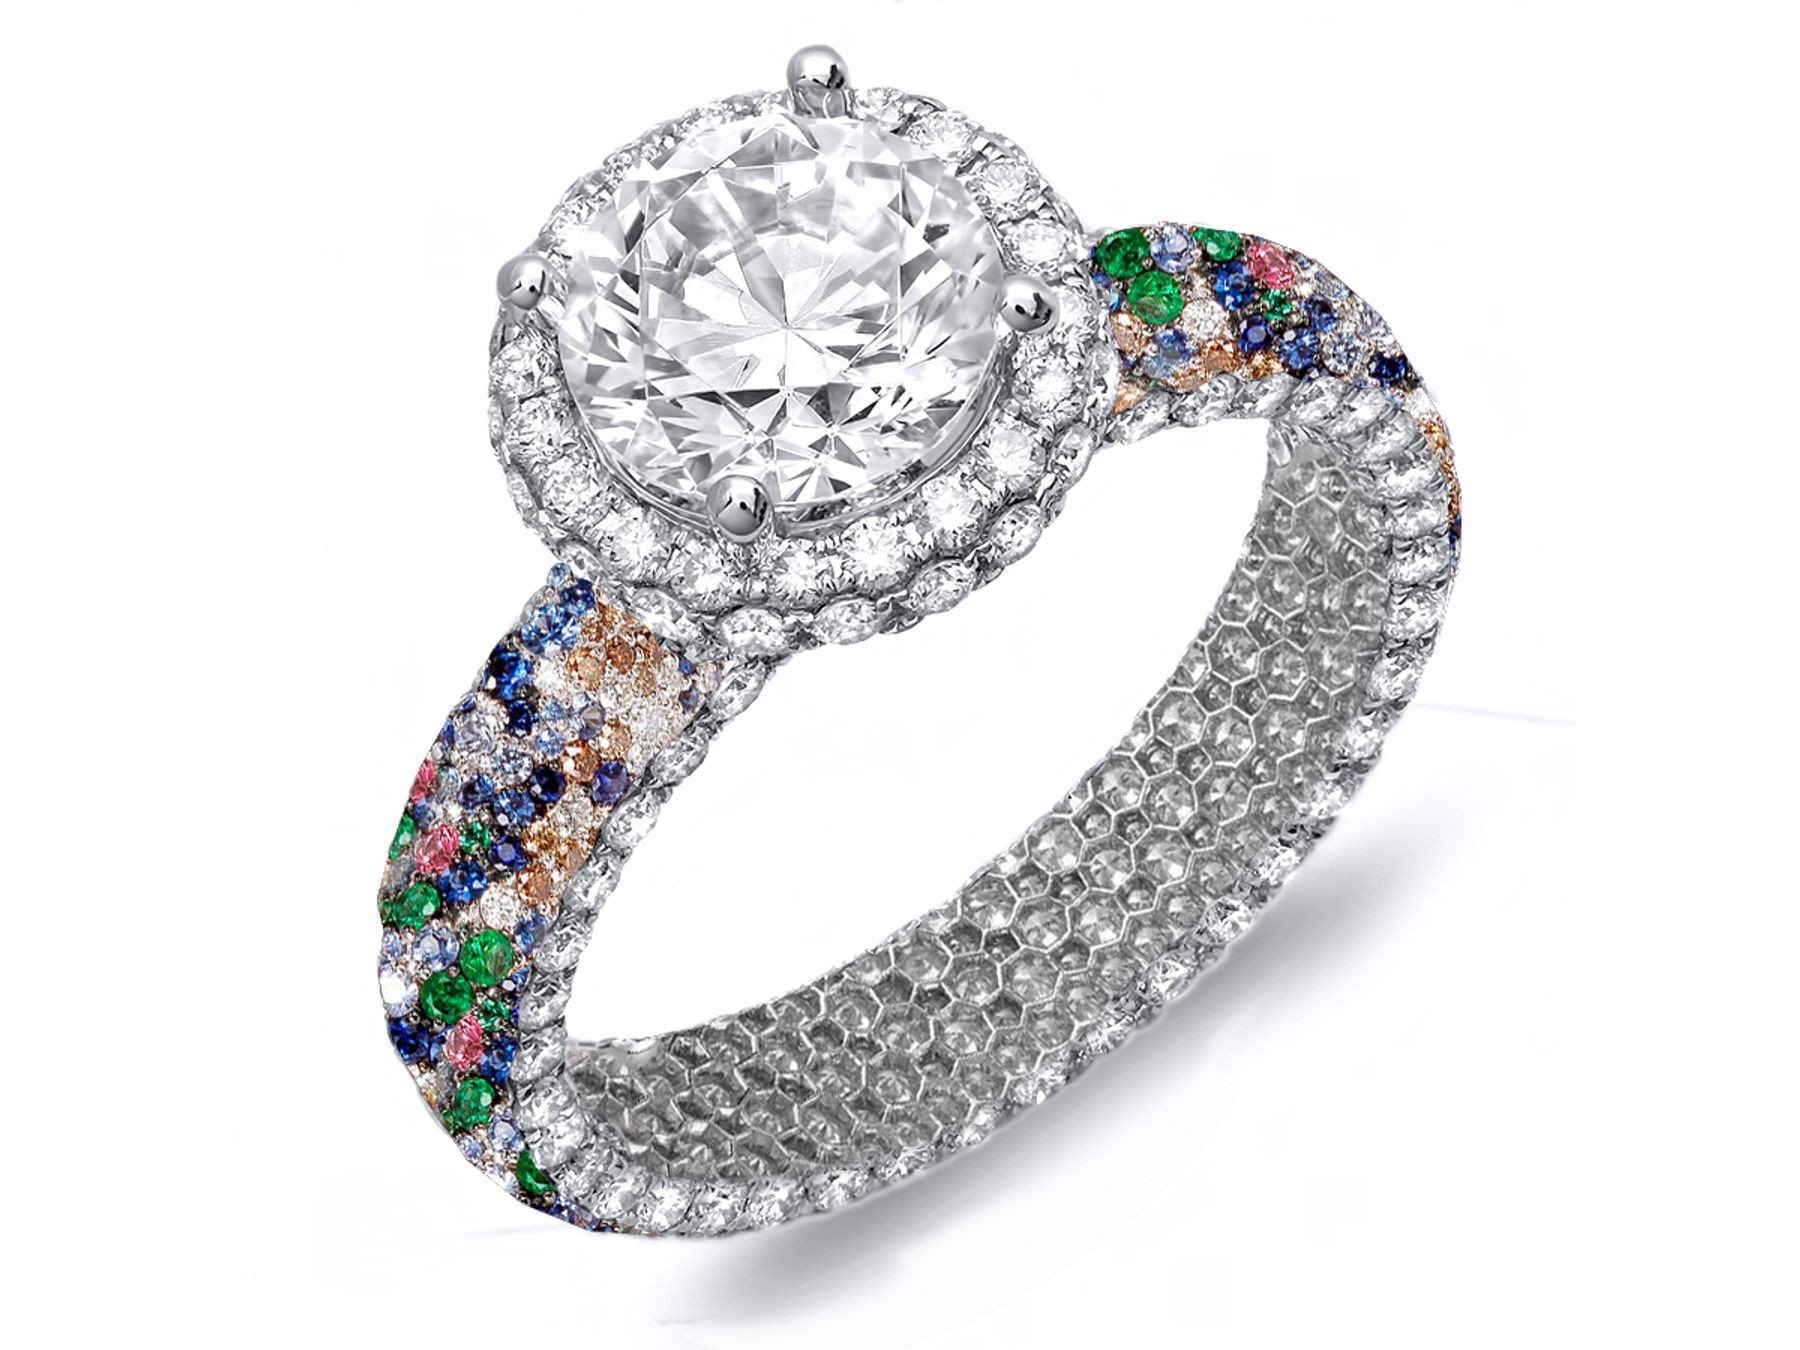 Made To Order Rings With French Pave Halo Brilliant Cut Round Diamonds & Precious Stones